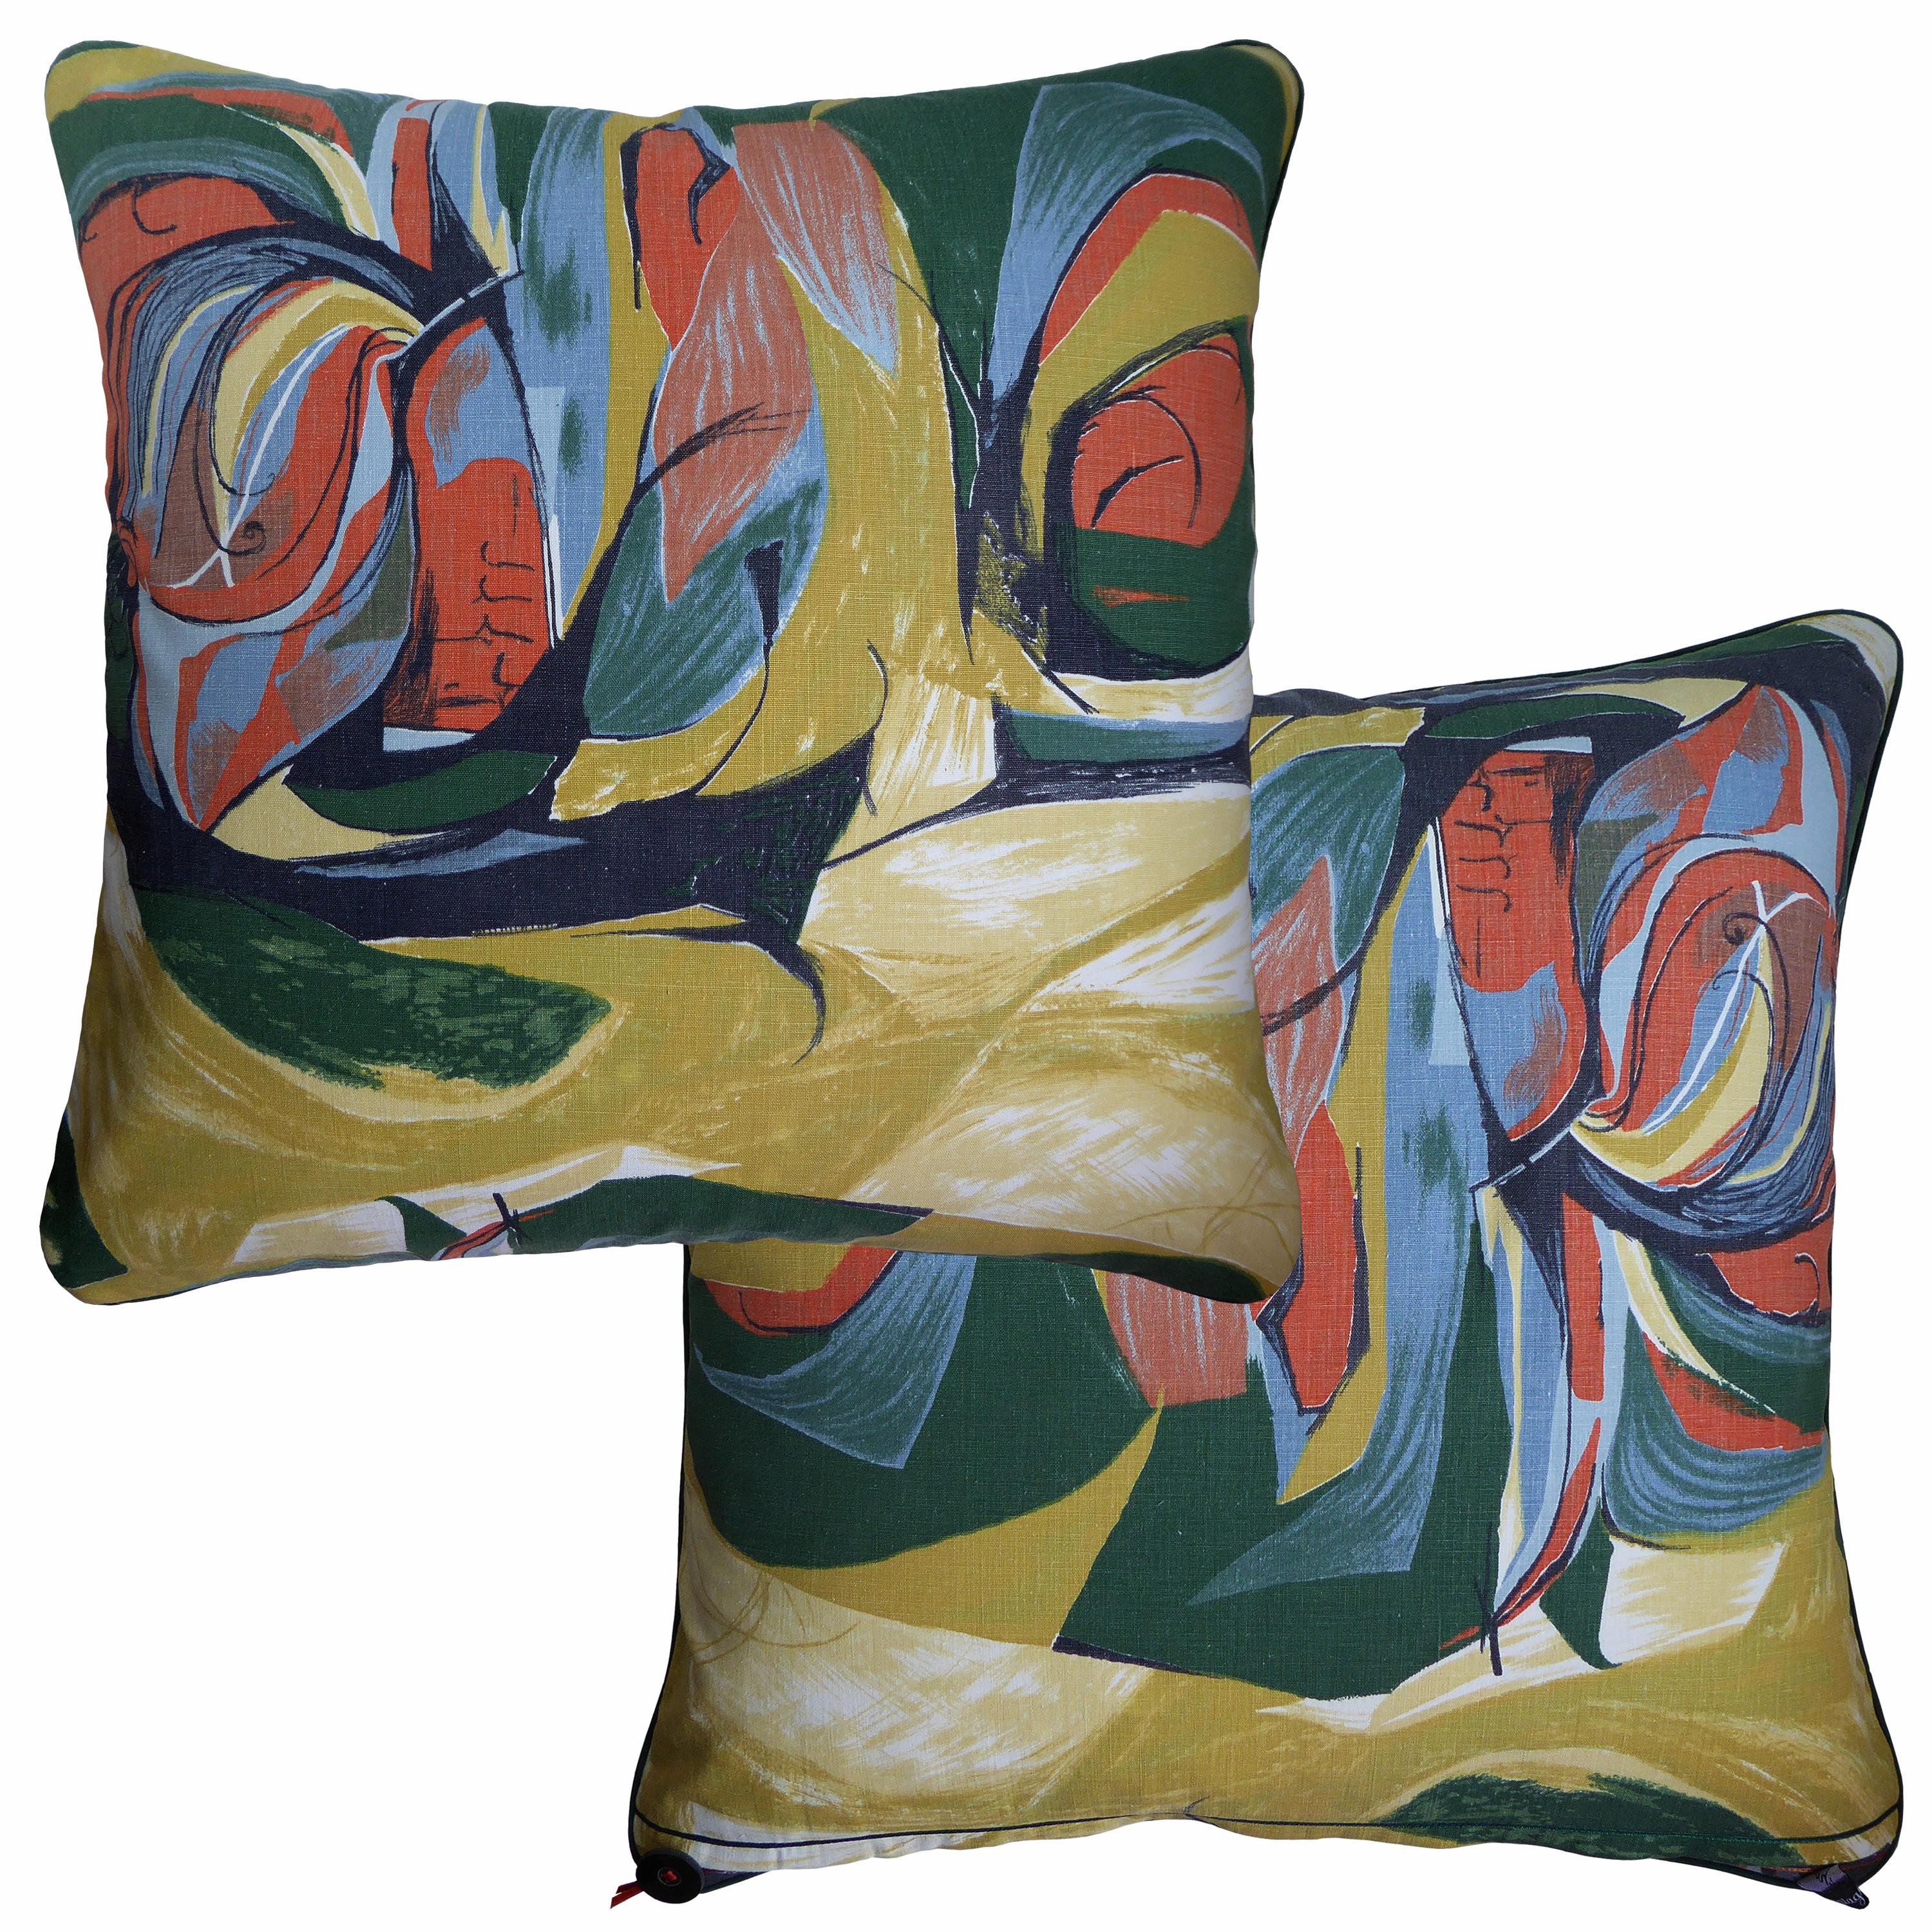 Sweet Corn
circa - 1960
British bespoke-made cushion created by using original vintage furnishing fabric designed by Barbara Brown for Heals of London
Provenance; Britain 
Made by Nichollette Yardley-Moore 
Vintage cushions 
Cotton with complete